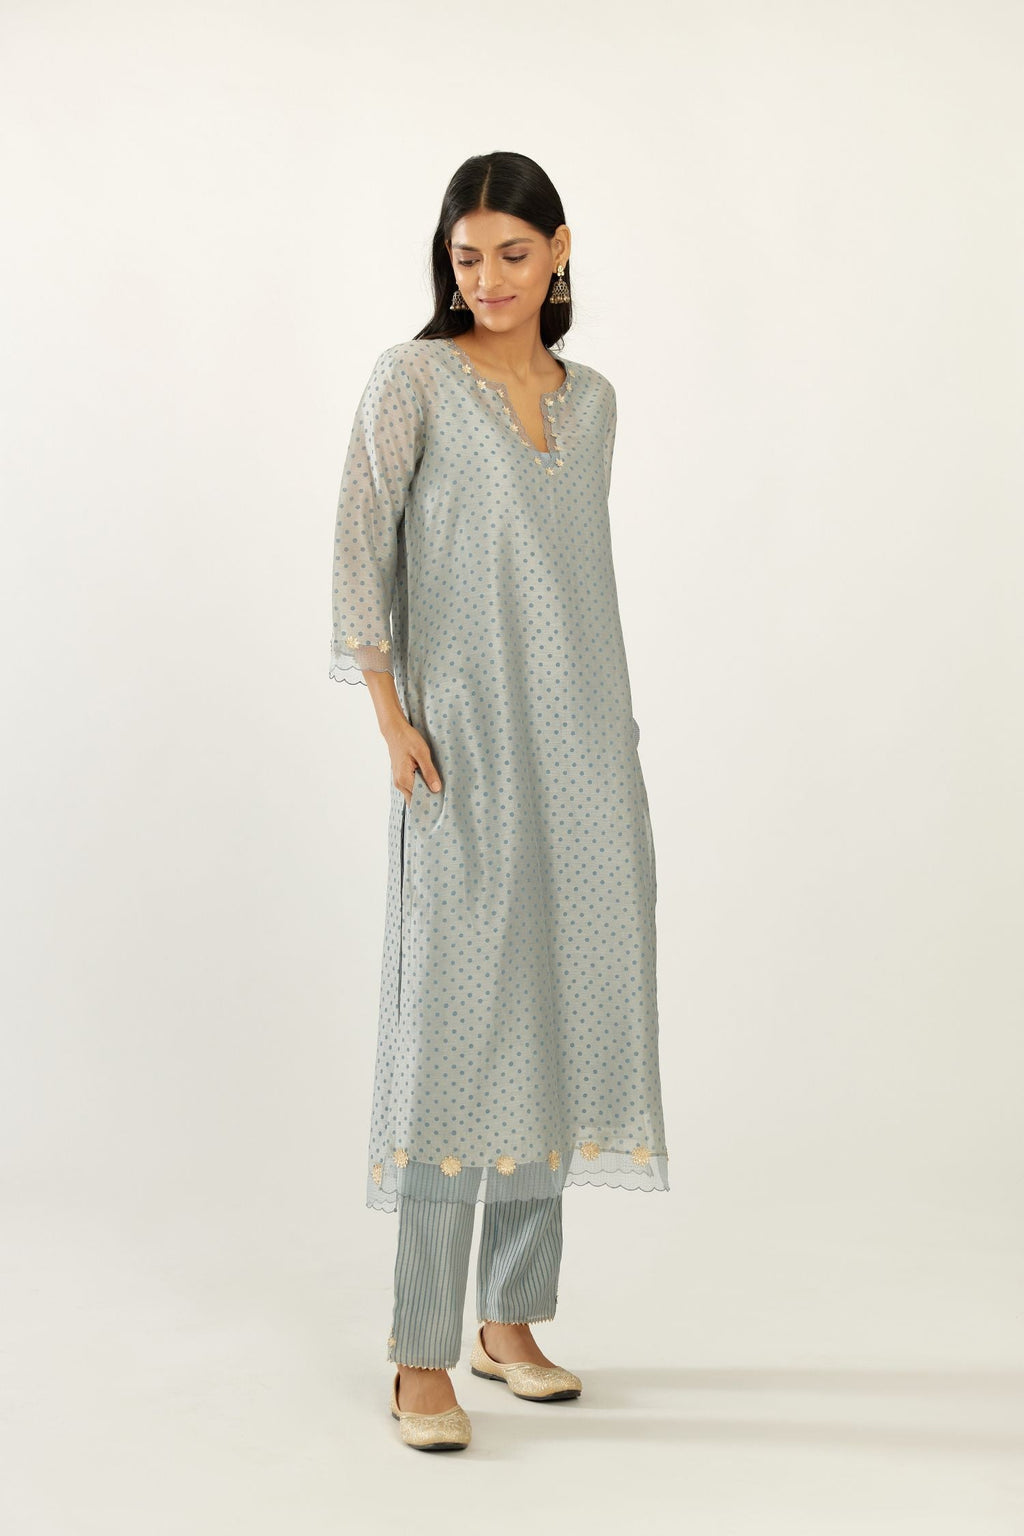 Blue silk chanderi hand block printed straight kurta set, highlighted with organza and gota embroidered flower at edges